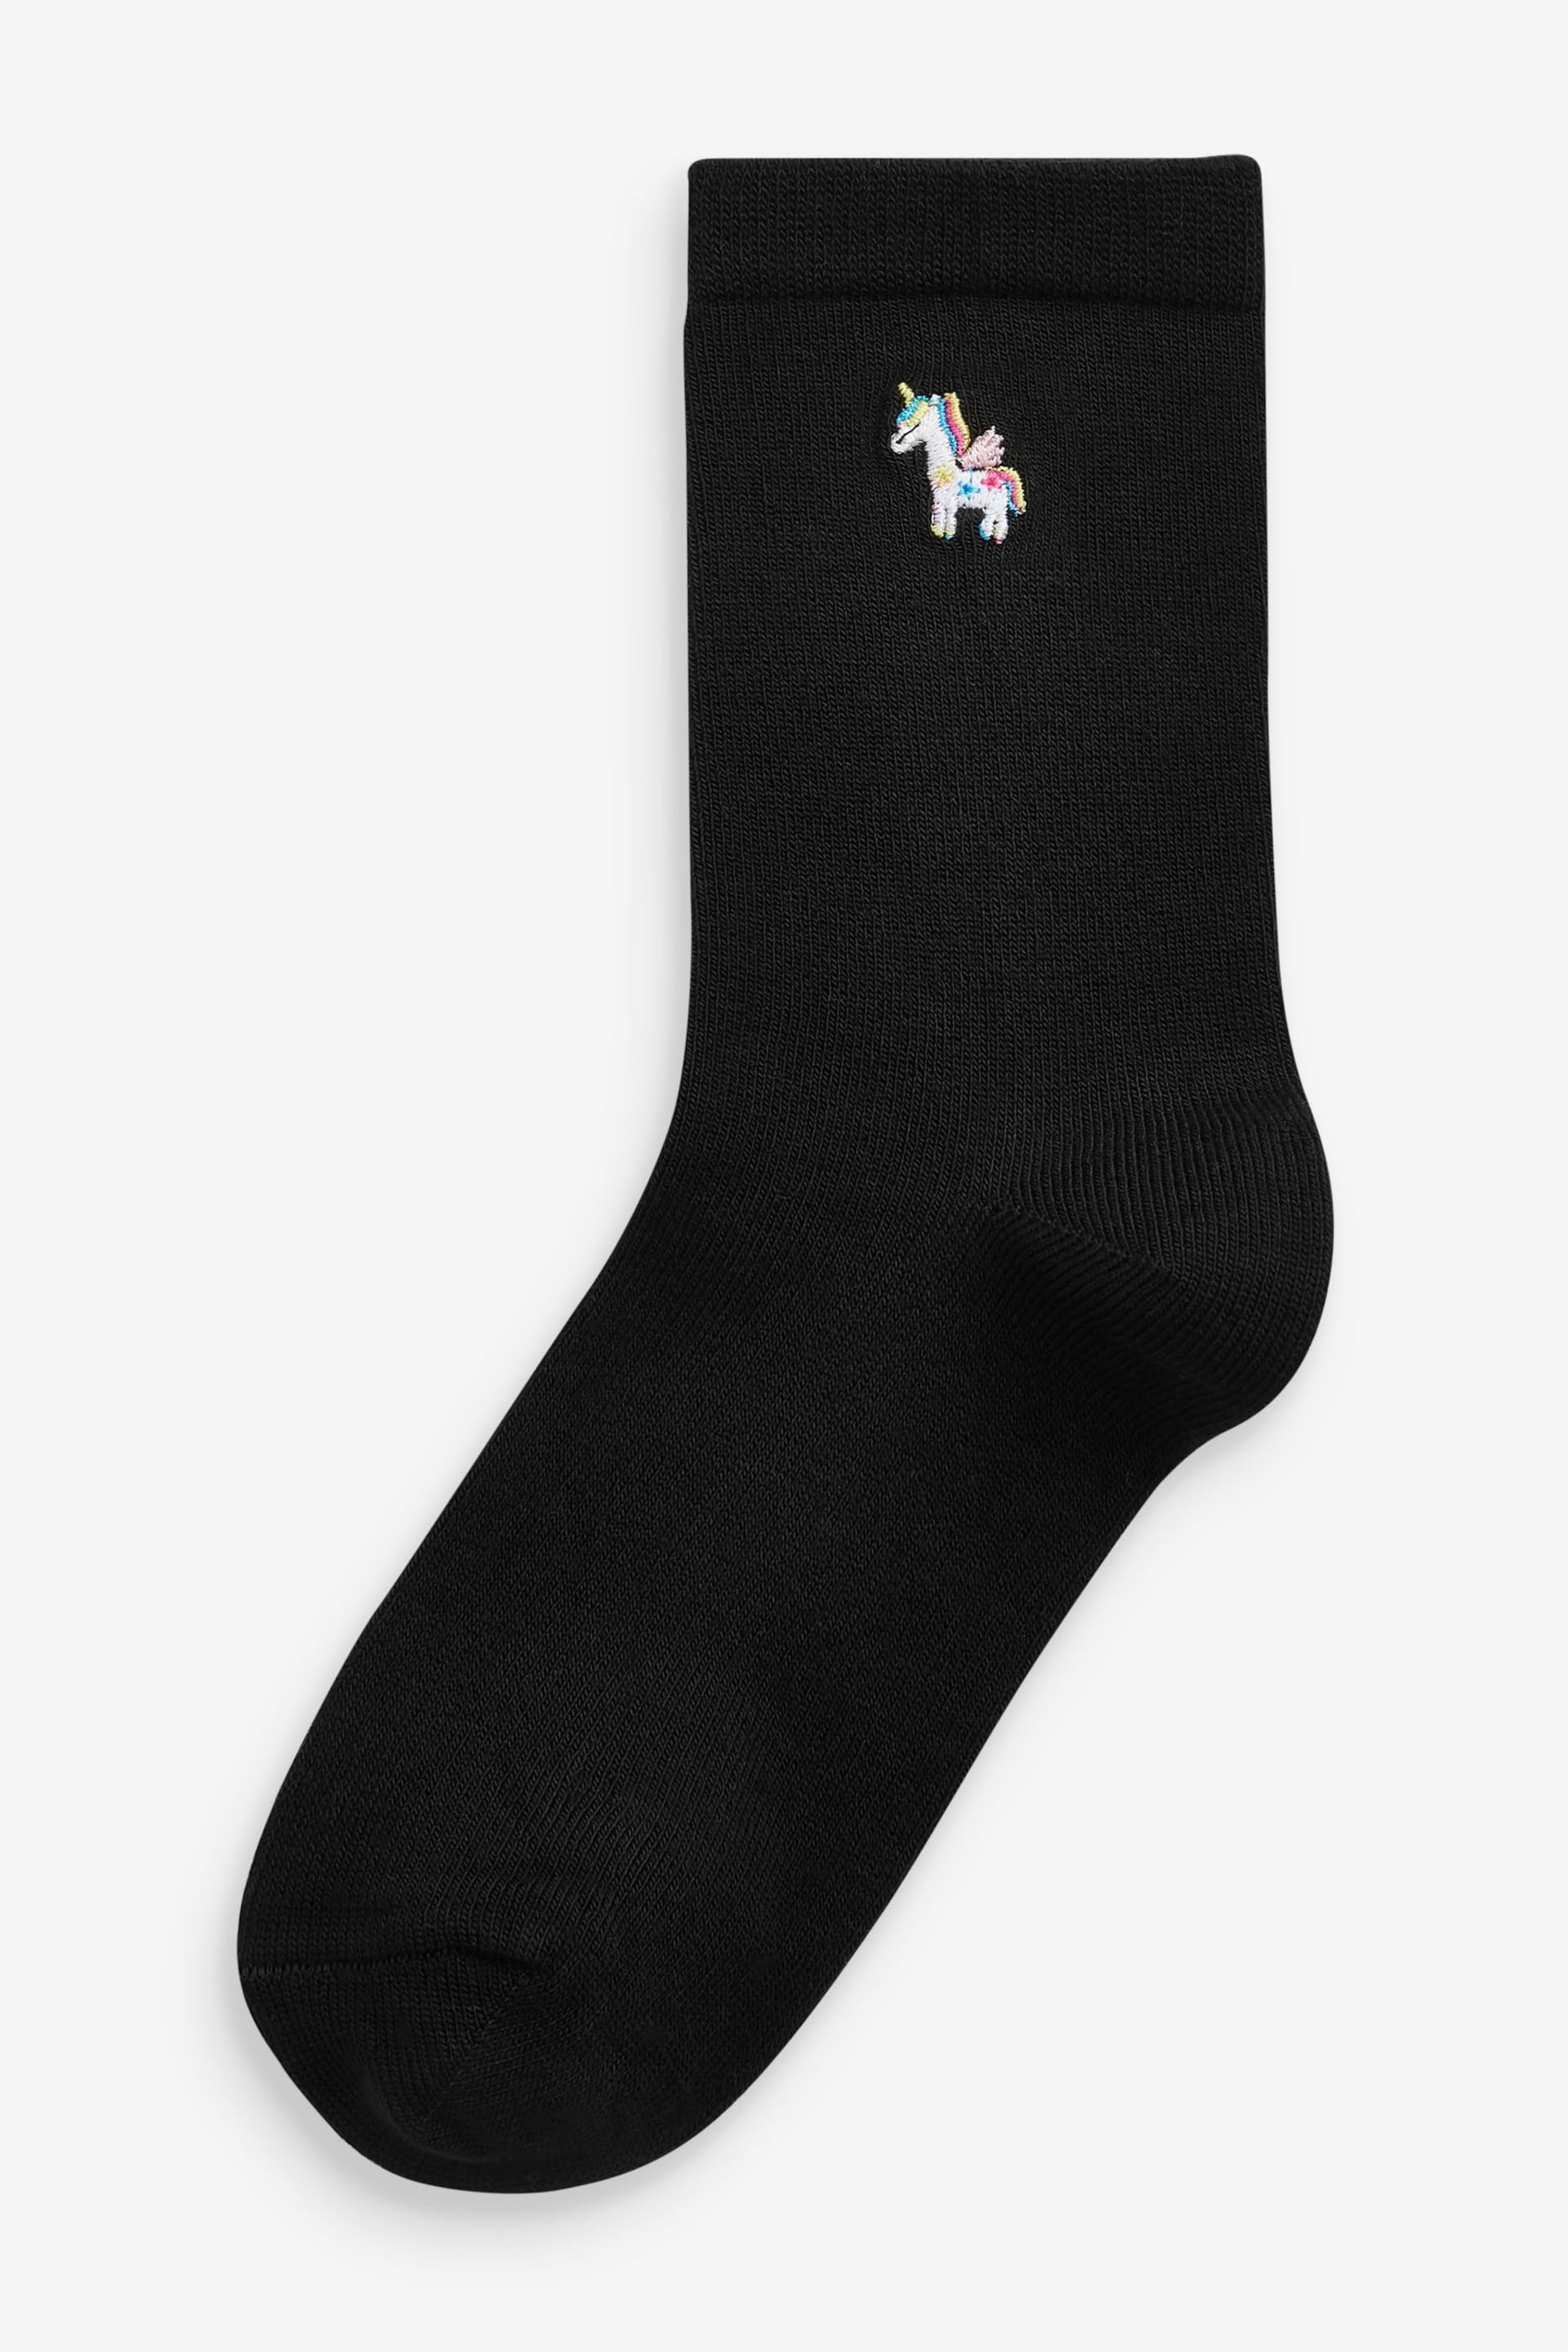 Black 5 Pack Bamboo Rich Unicorn Embroidered Ankle Socks - Image 5 of 6